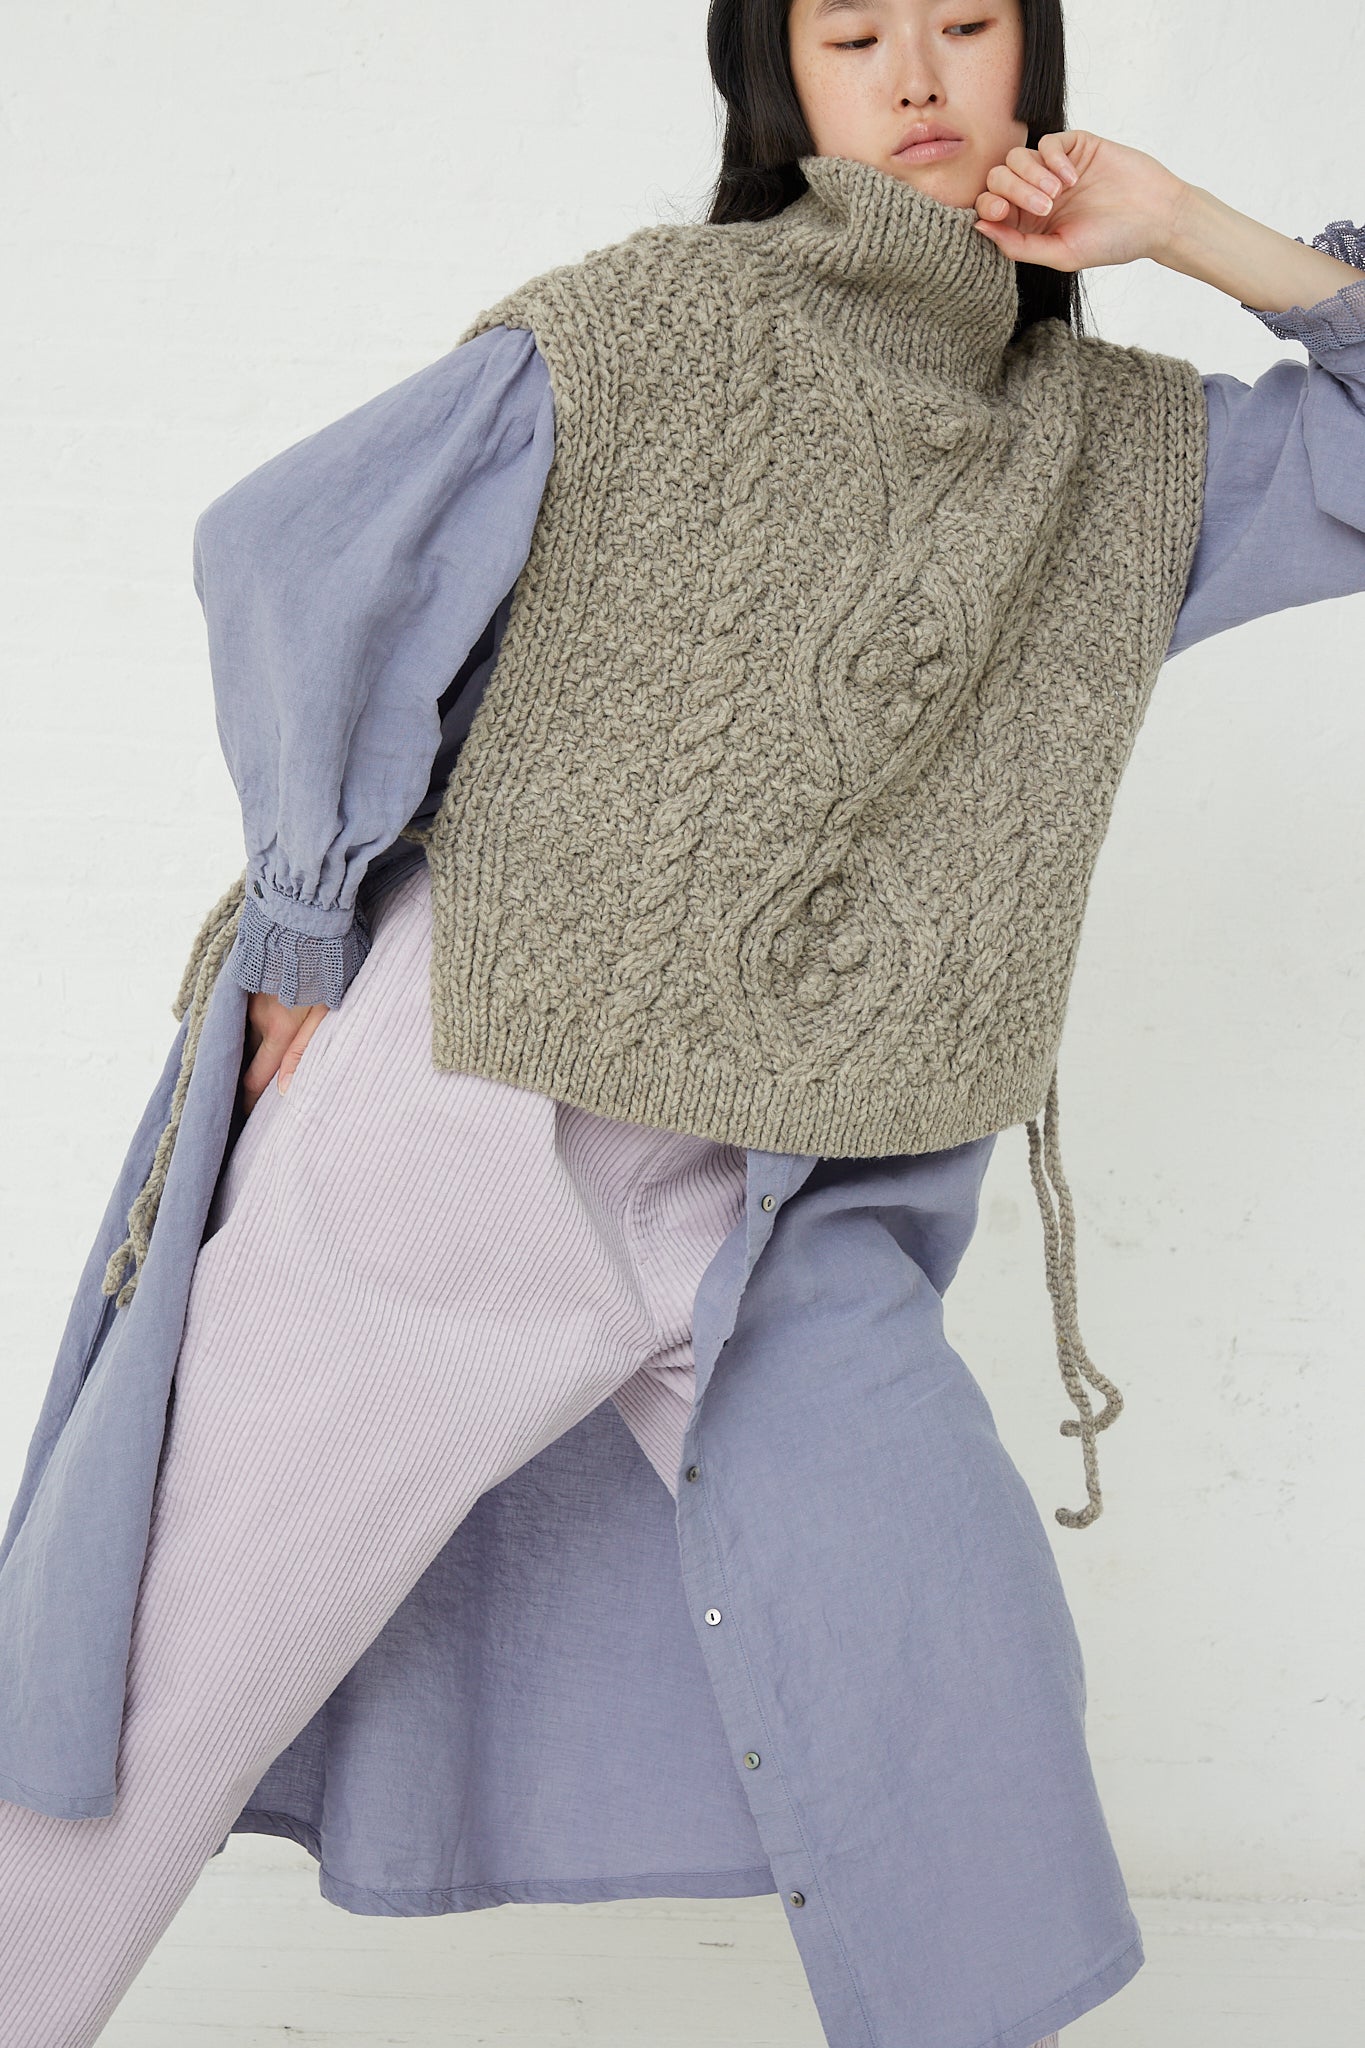 A woman wearing a nest Robe Peruvian Wool Hand Knitted Cable Stitch Vest in Beige and purple pants.